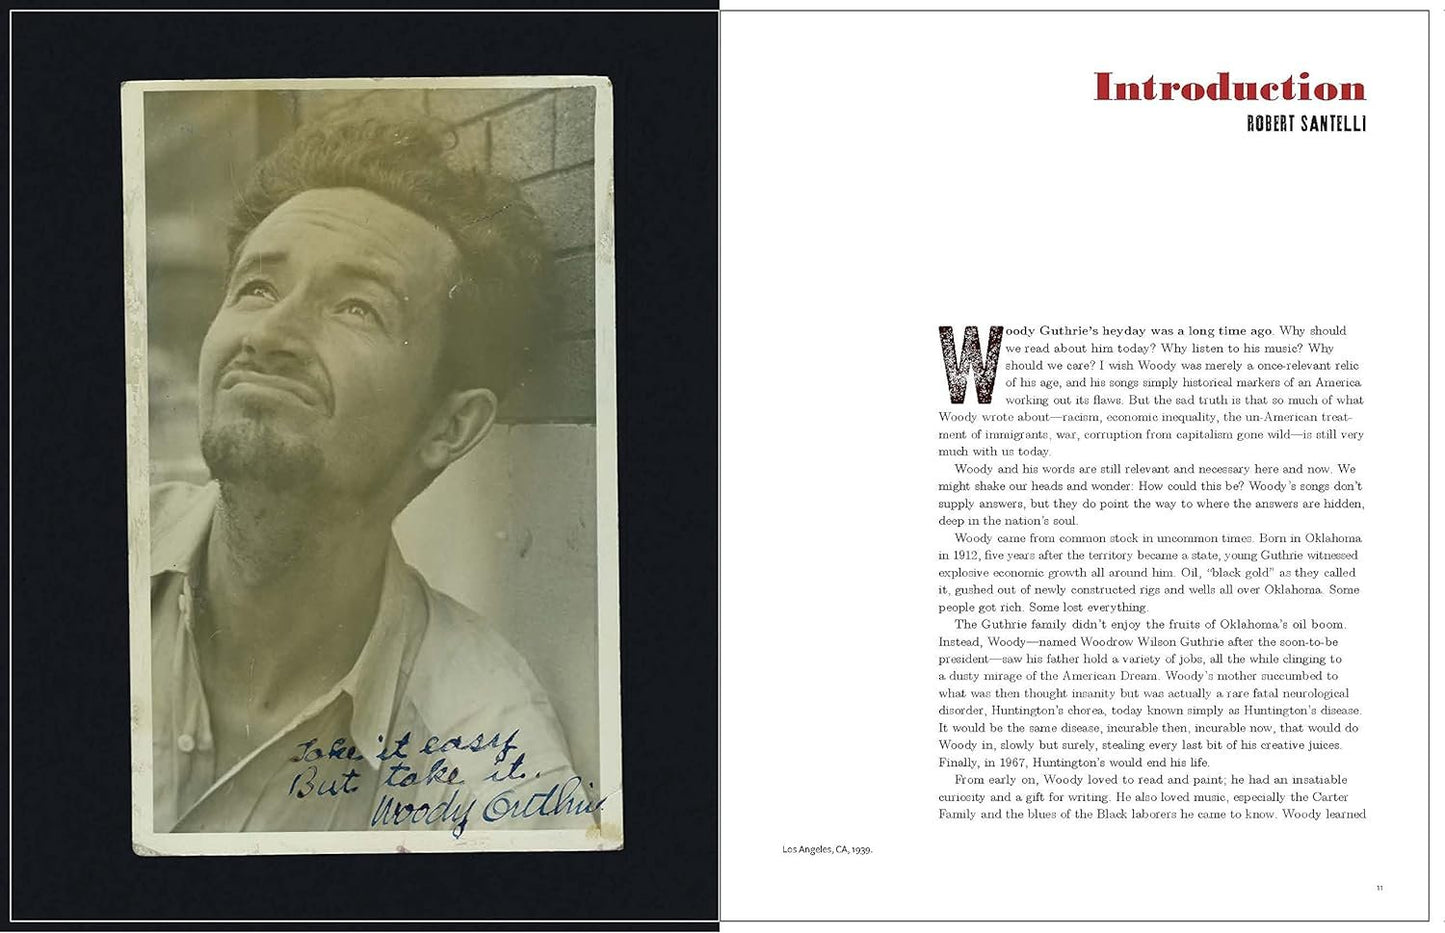 Woody Guthrie: Songs and Art * Words and Wisdom